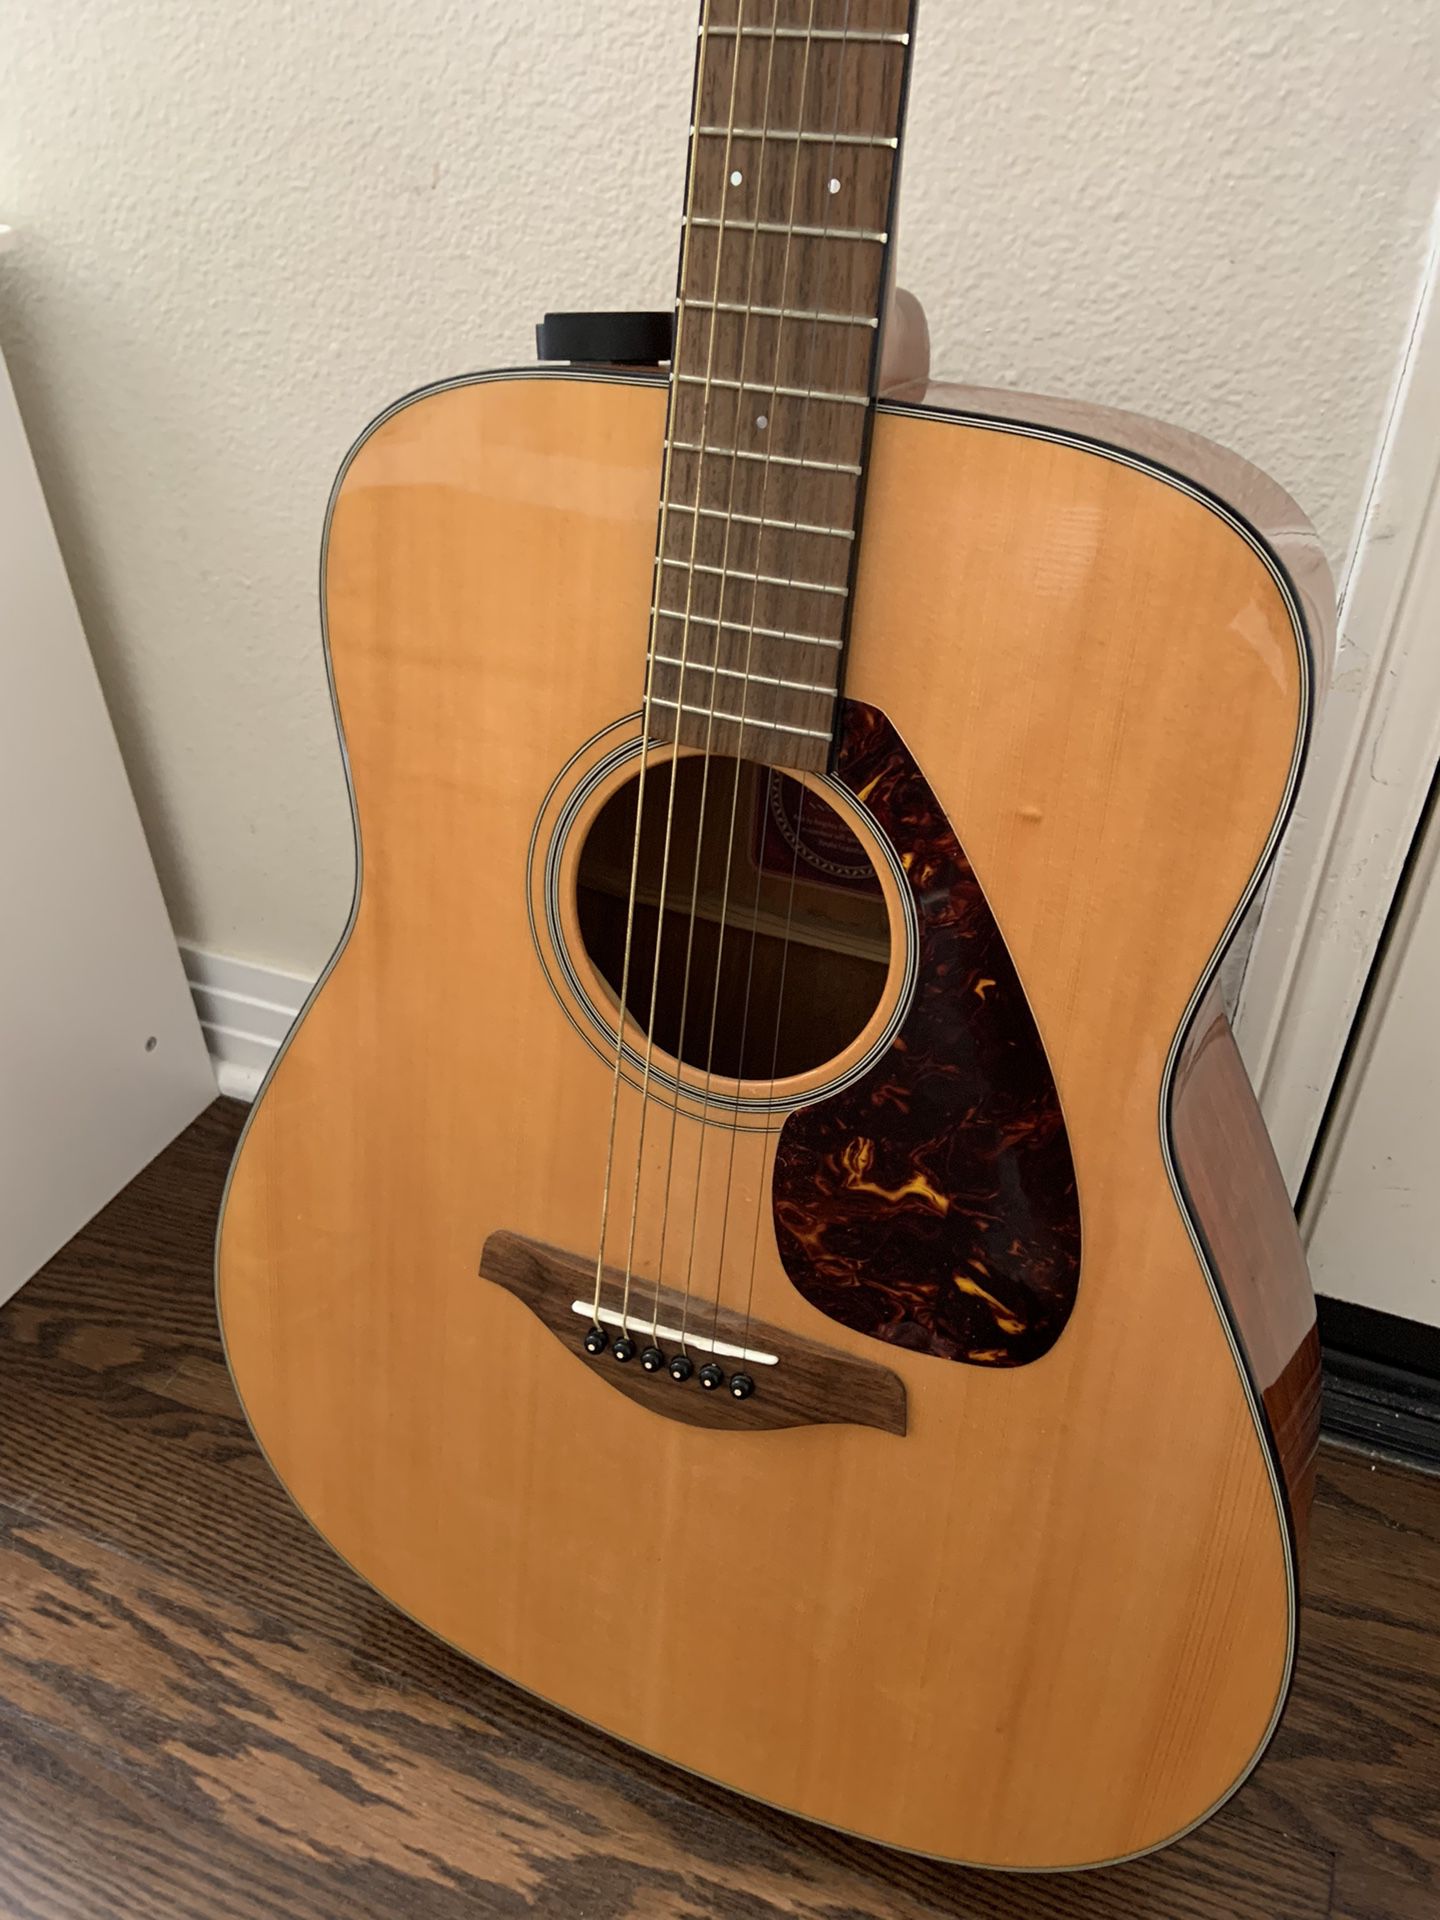 Yamaha Fg700s Acoustic Guitar With Case